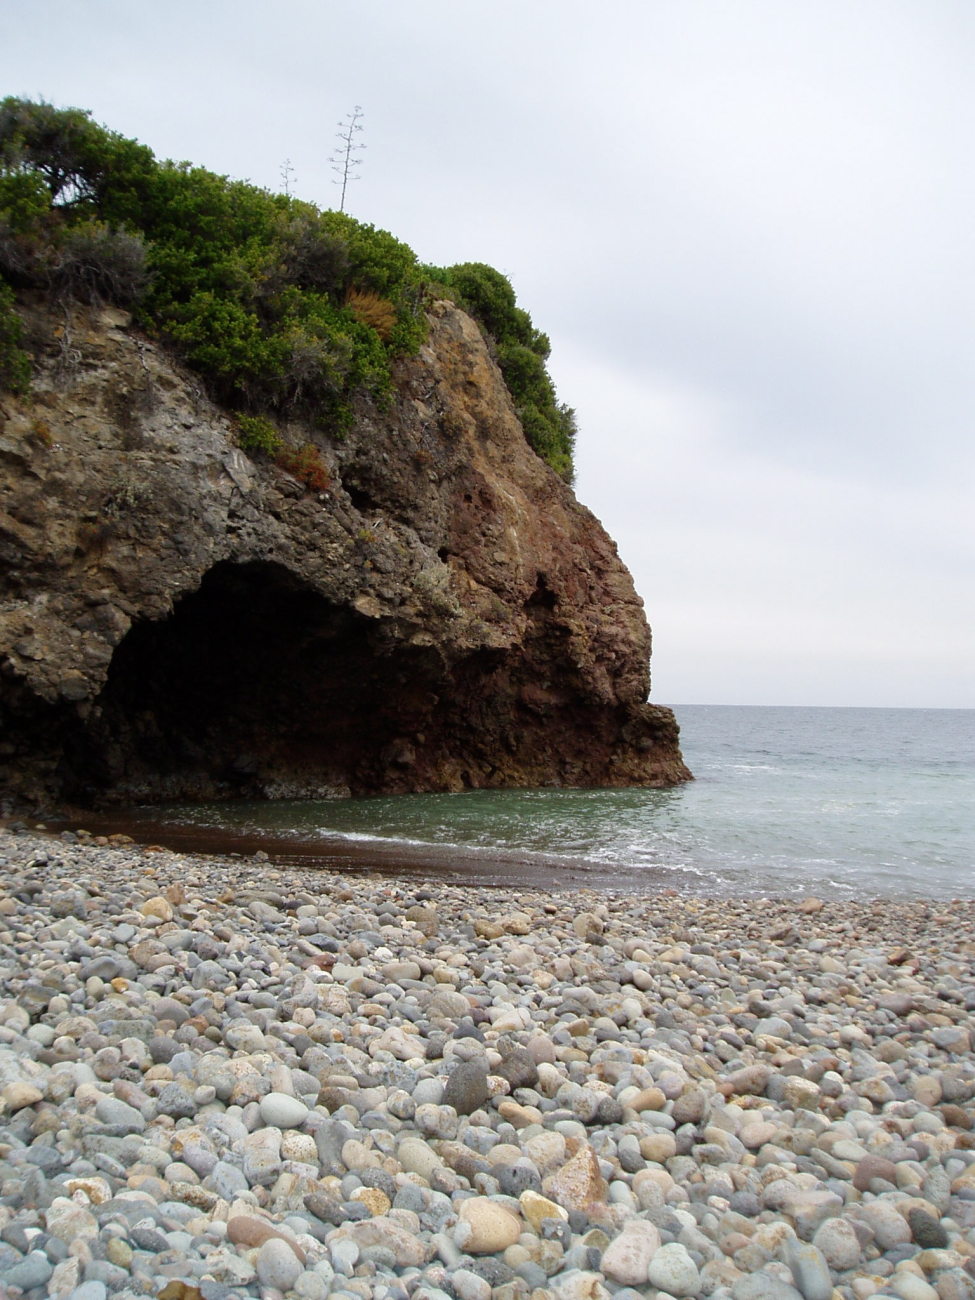 Beginnings of a sea cave or possibly an arch with a boulder beach in theforeground